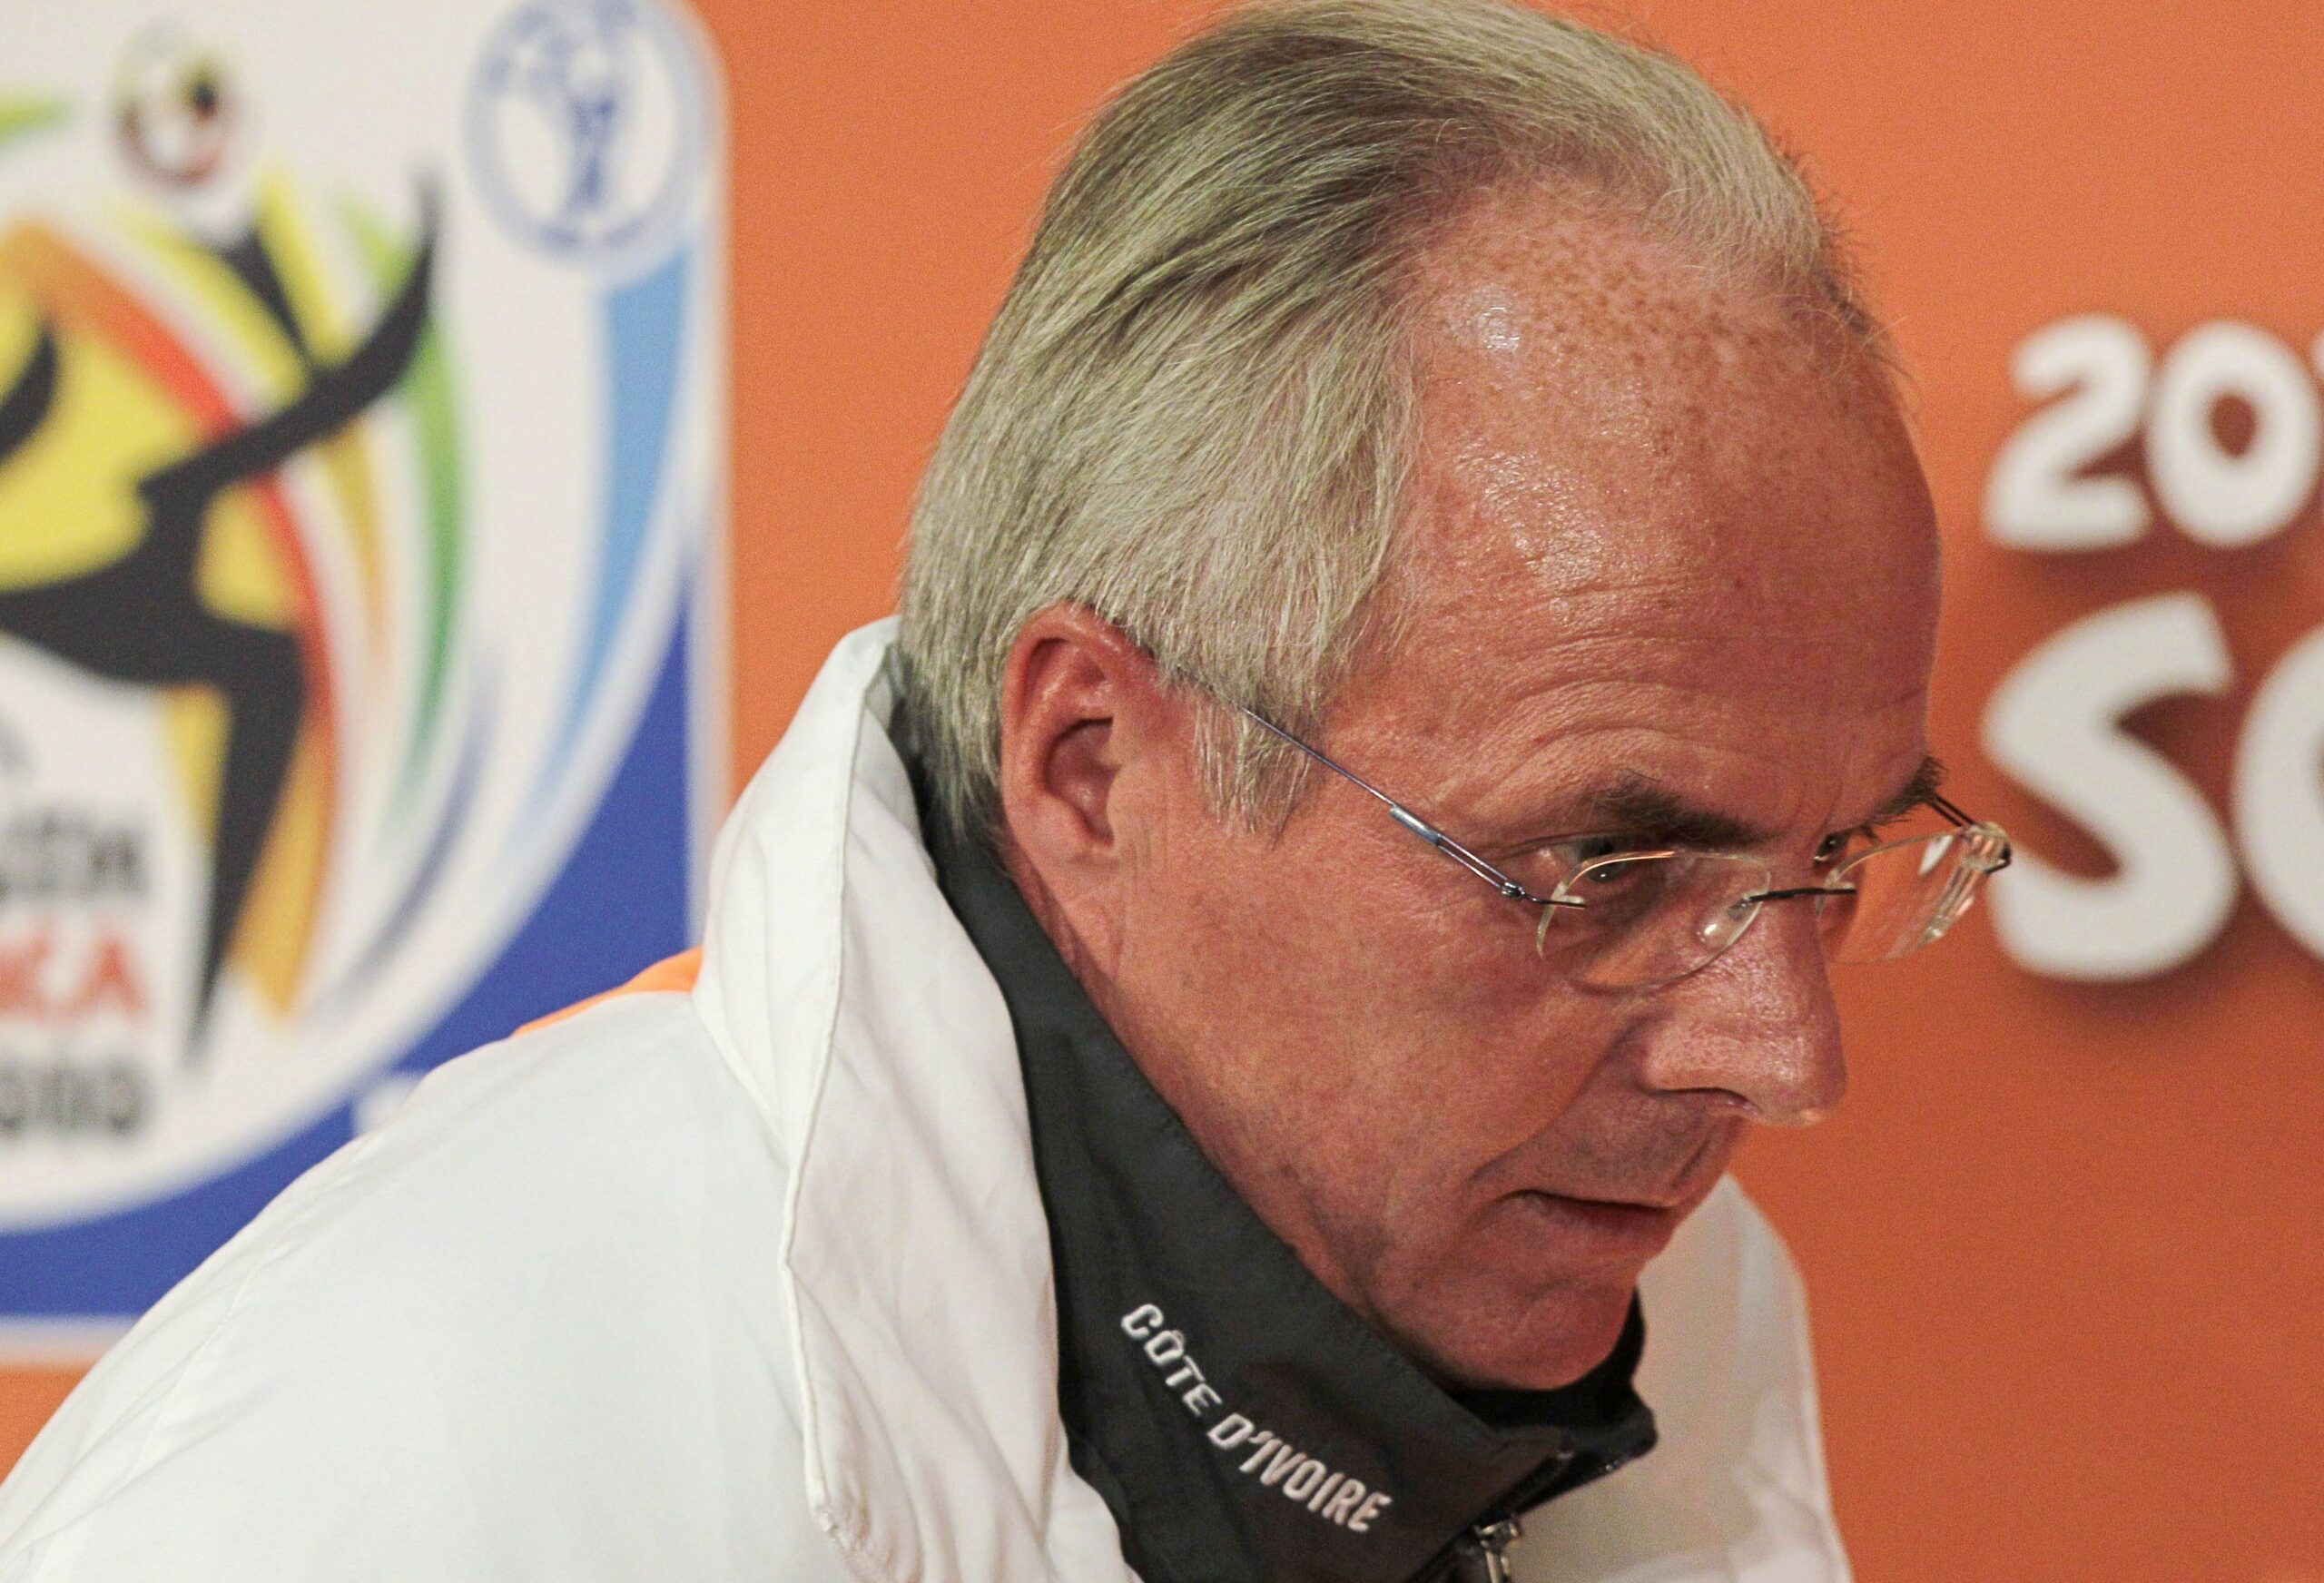 Ivory Coast head coach Sven-Goran Eriksson attends the news conference a day before the match against North Korea in Nelspruit, South Africa, Thursday June 24, 2010, as they are playing Group G of the soccer World Cup 2010.  (AP Photo/Kin Cheung)